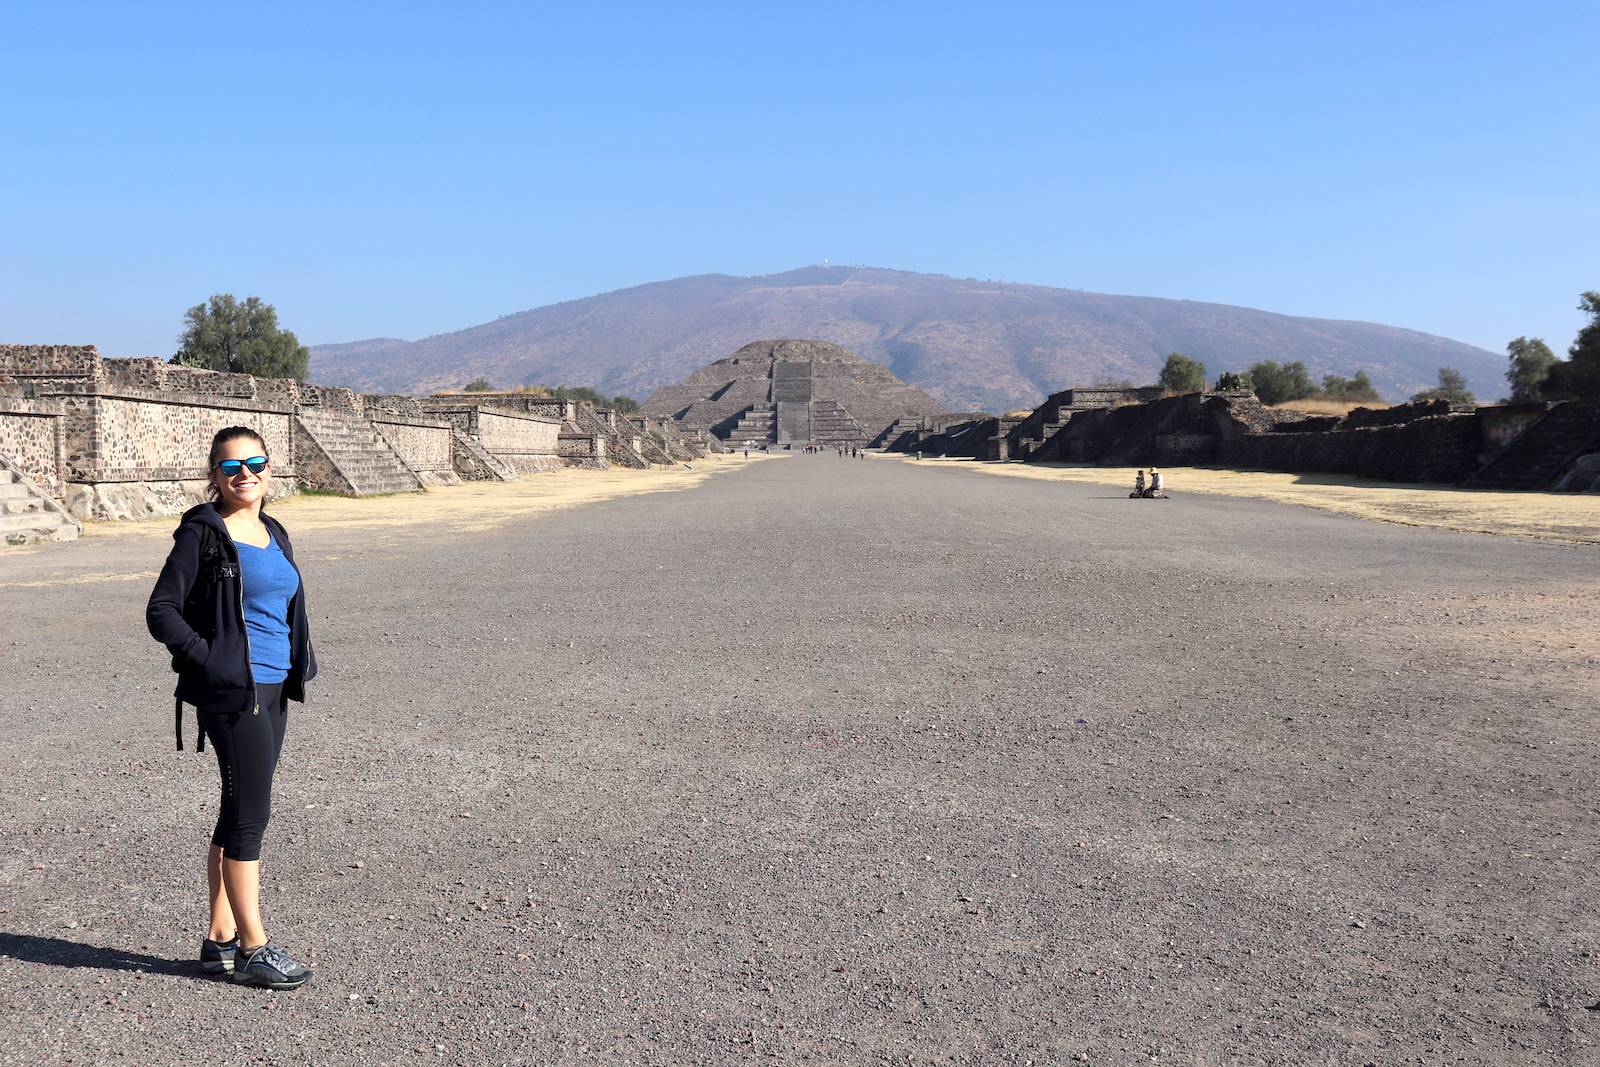 The Avenue of the Dead, Teotihuacan